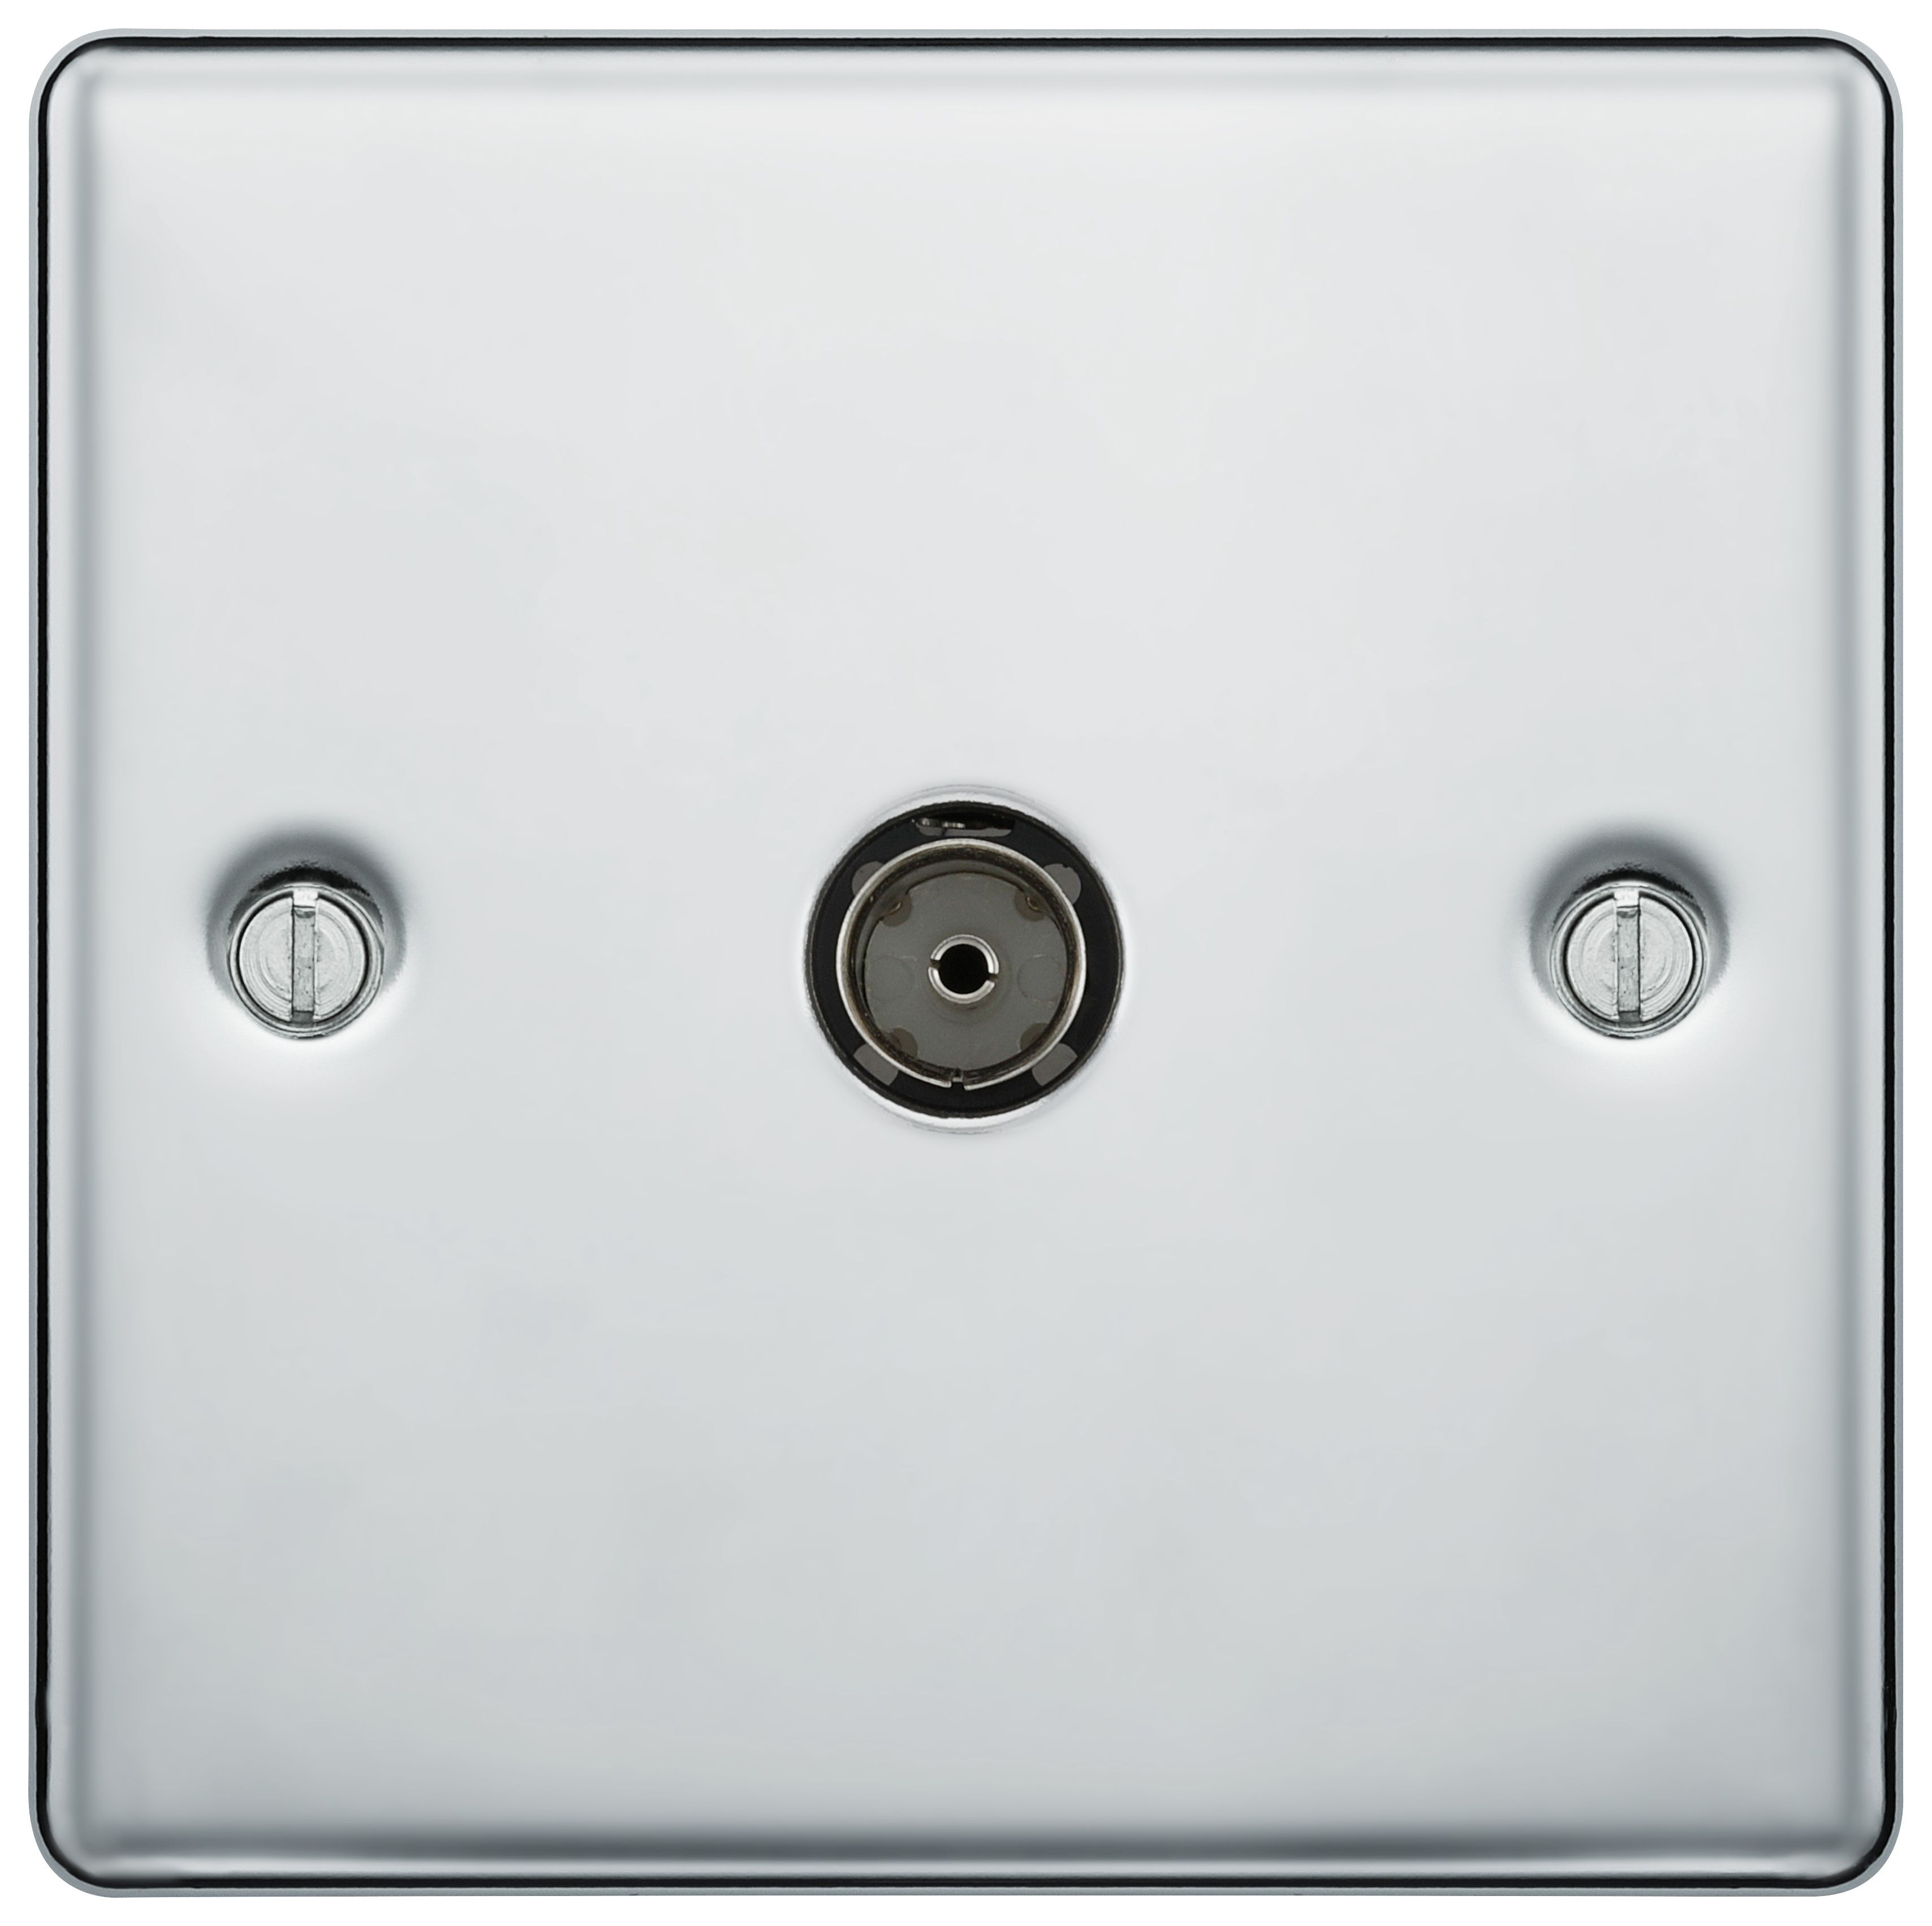 Image of BG Screwed Raised Plate Single Socket For Tv Or Fm Co-Axial Aerial Connection - Polished Chrome